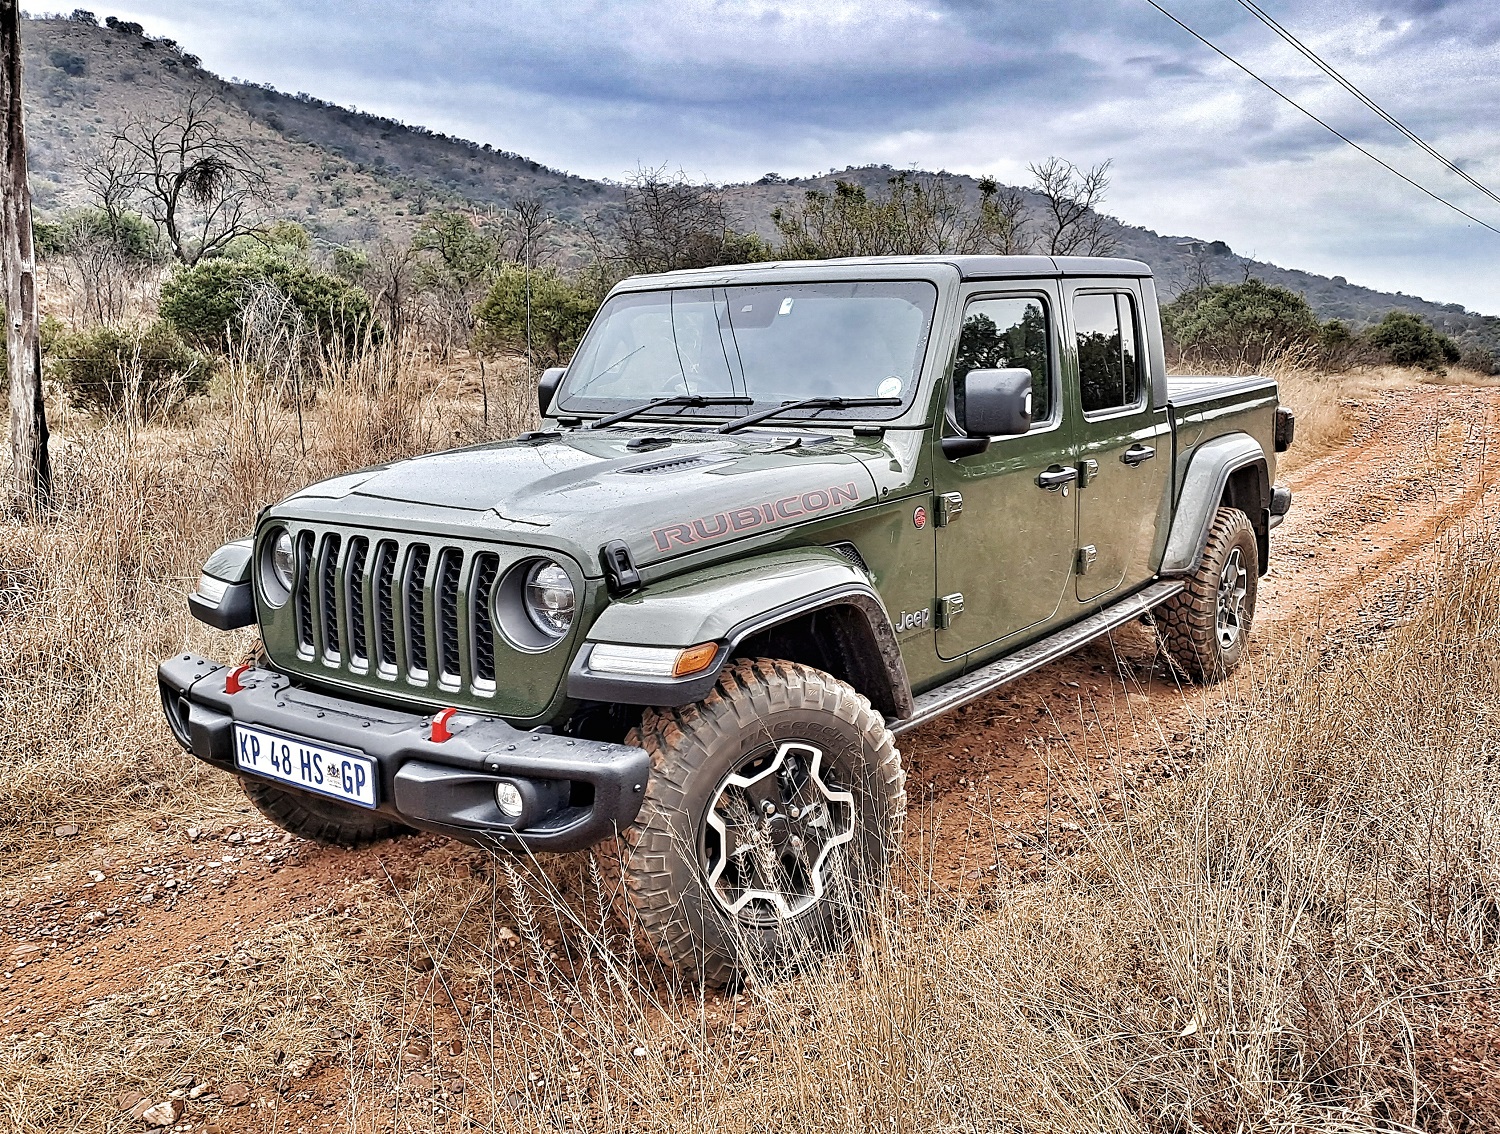 Jeep bakkie left-field alternative to Toyota Hilux and Ford Ranger